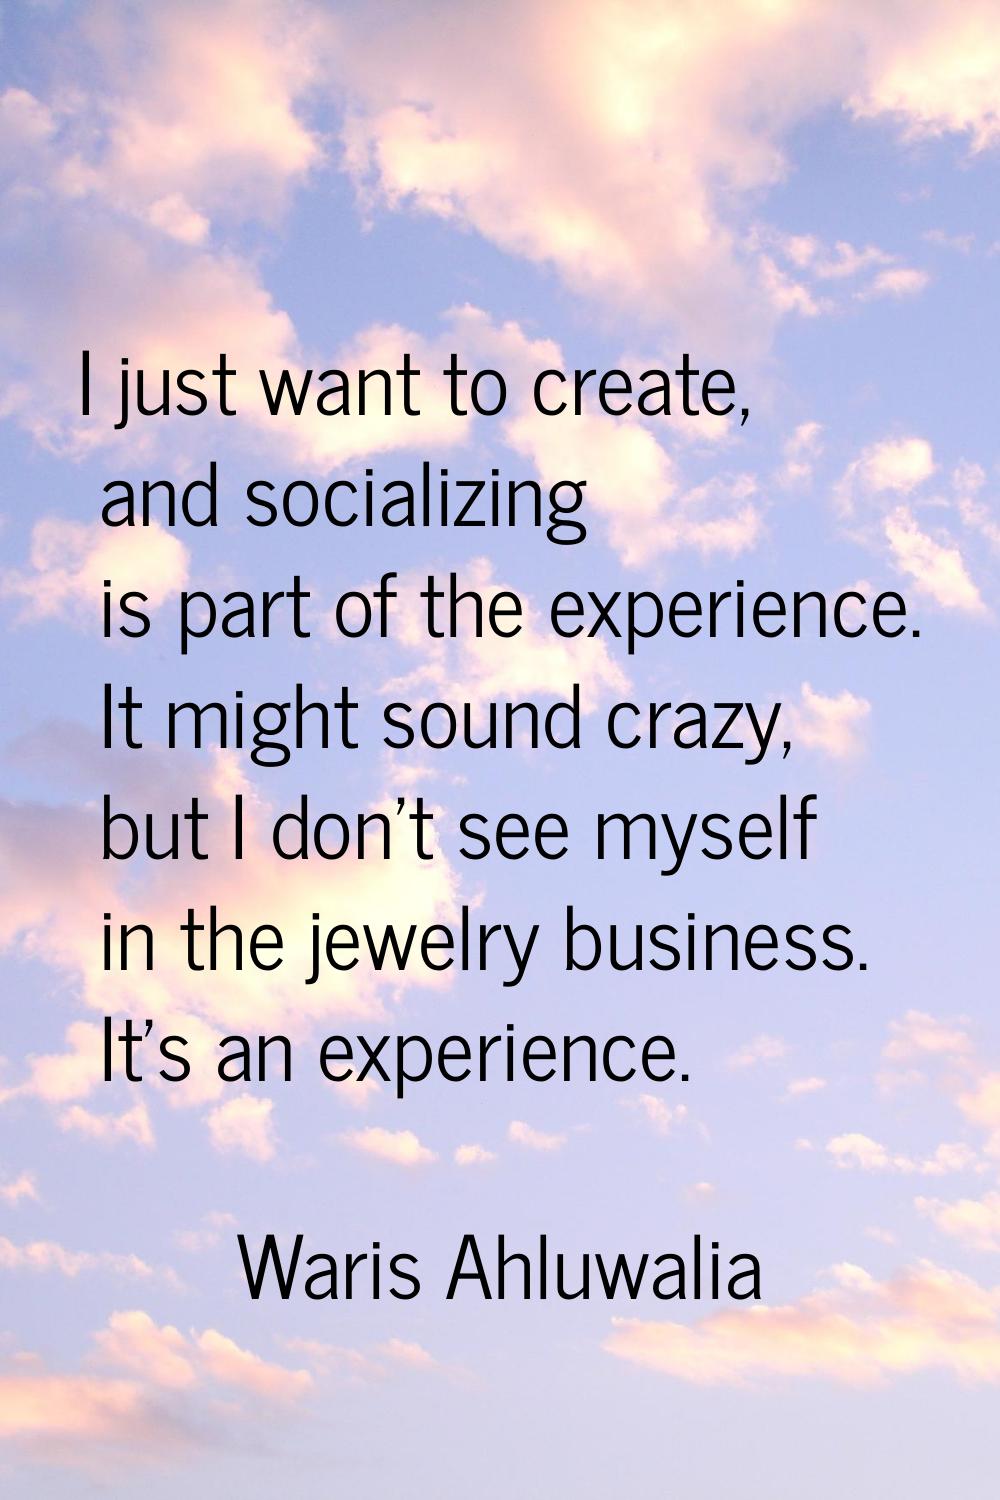 I just want to create, and socializing is part of the experience. It might sound crazy, but I don't